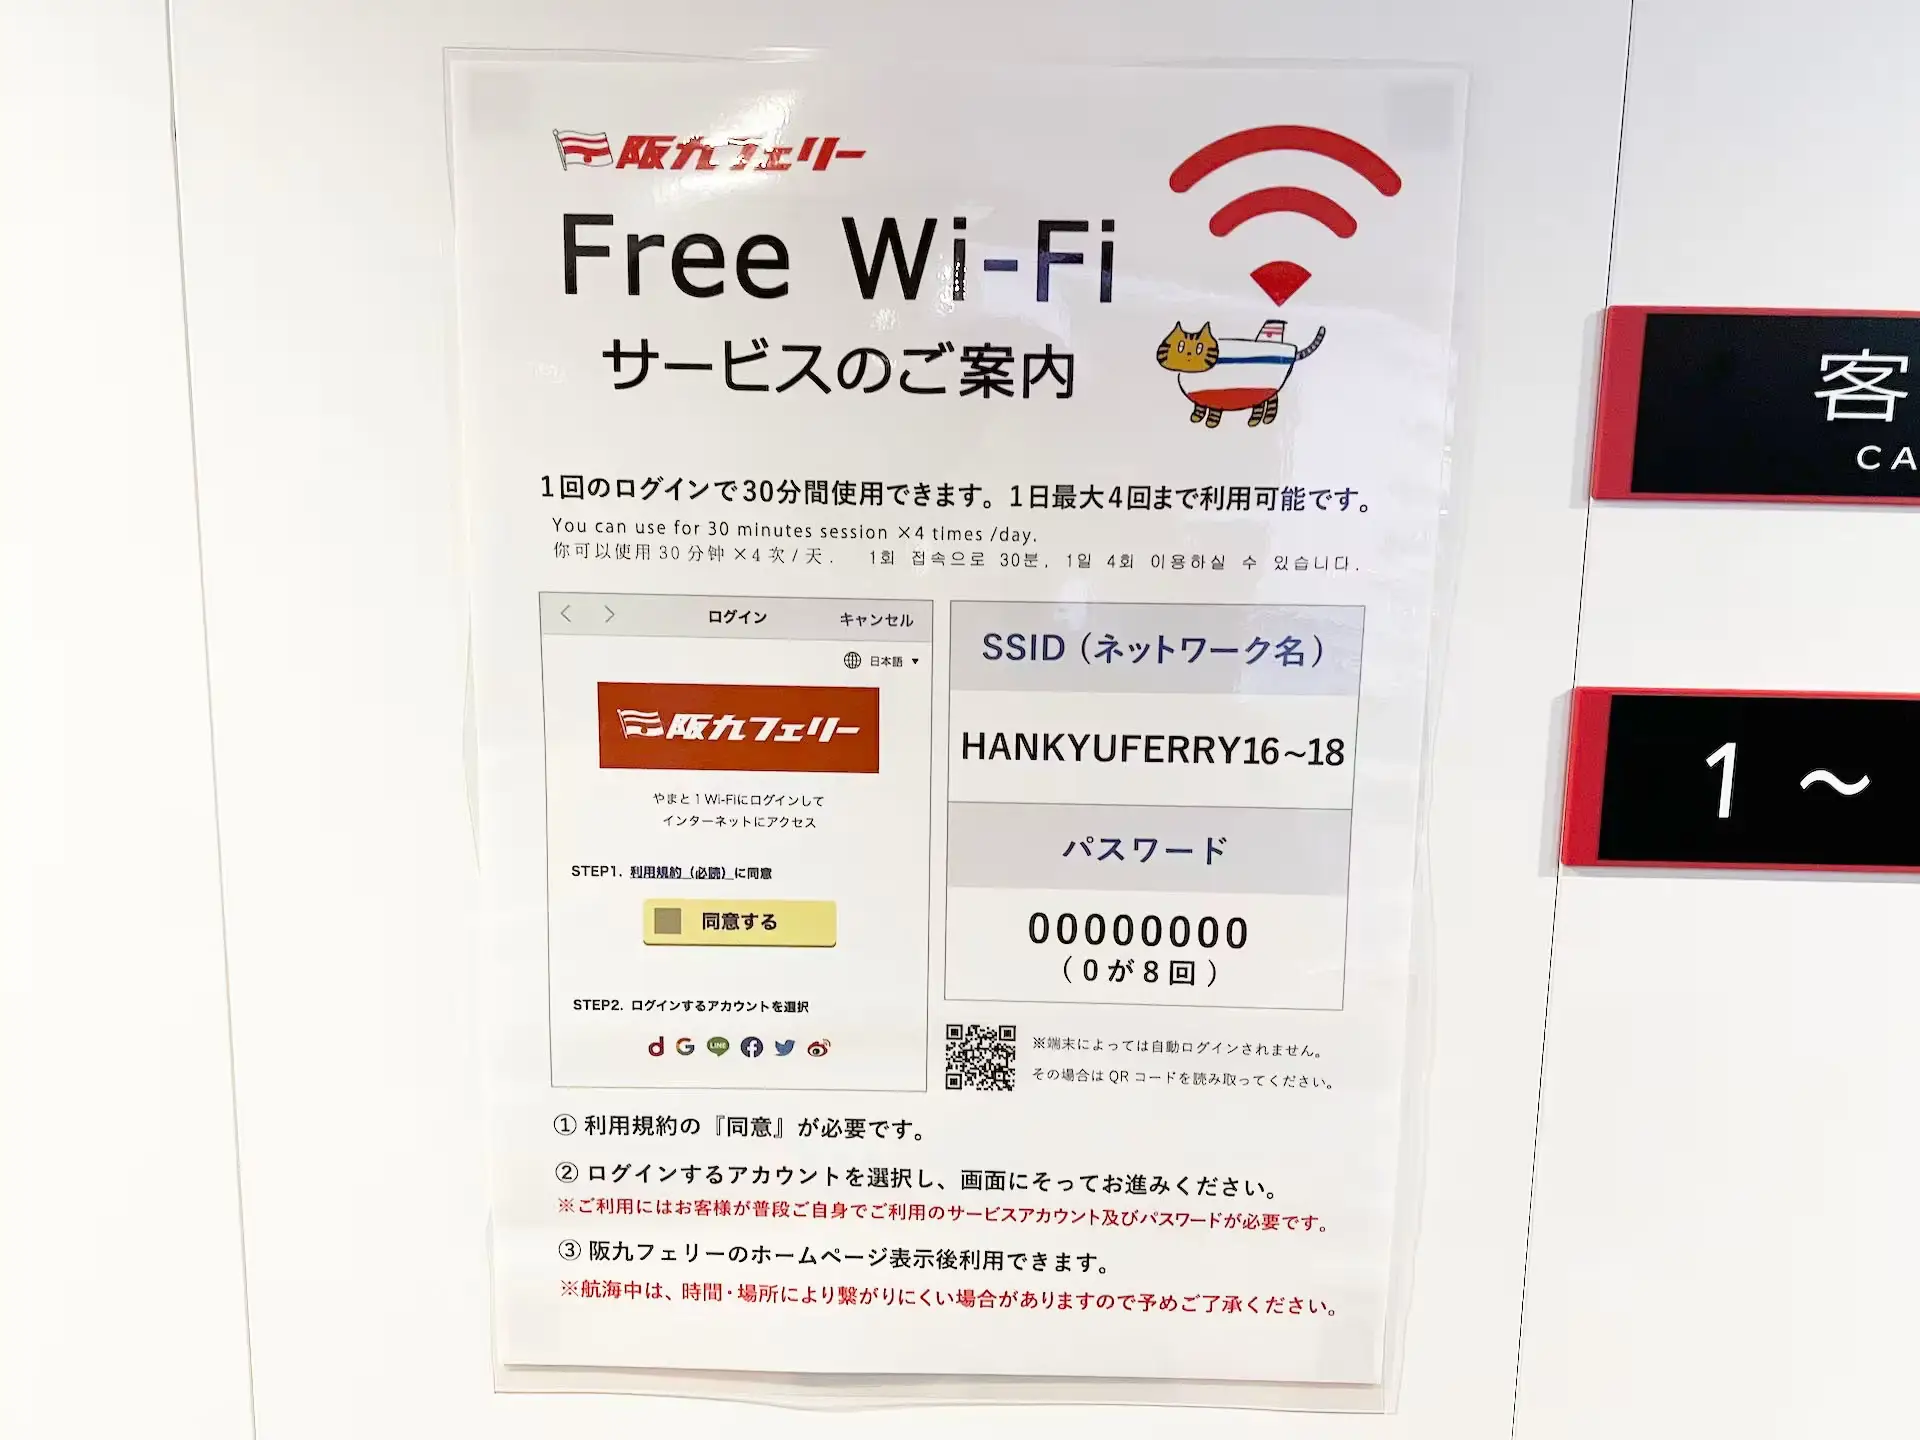 Hankyu Ferry Yamato Paper with instructions for operating the free Wi-Fi on board